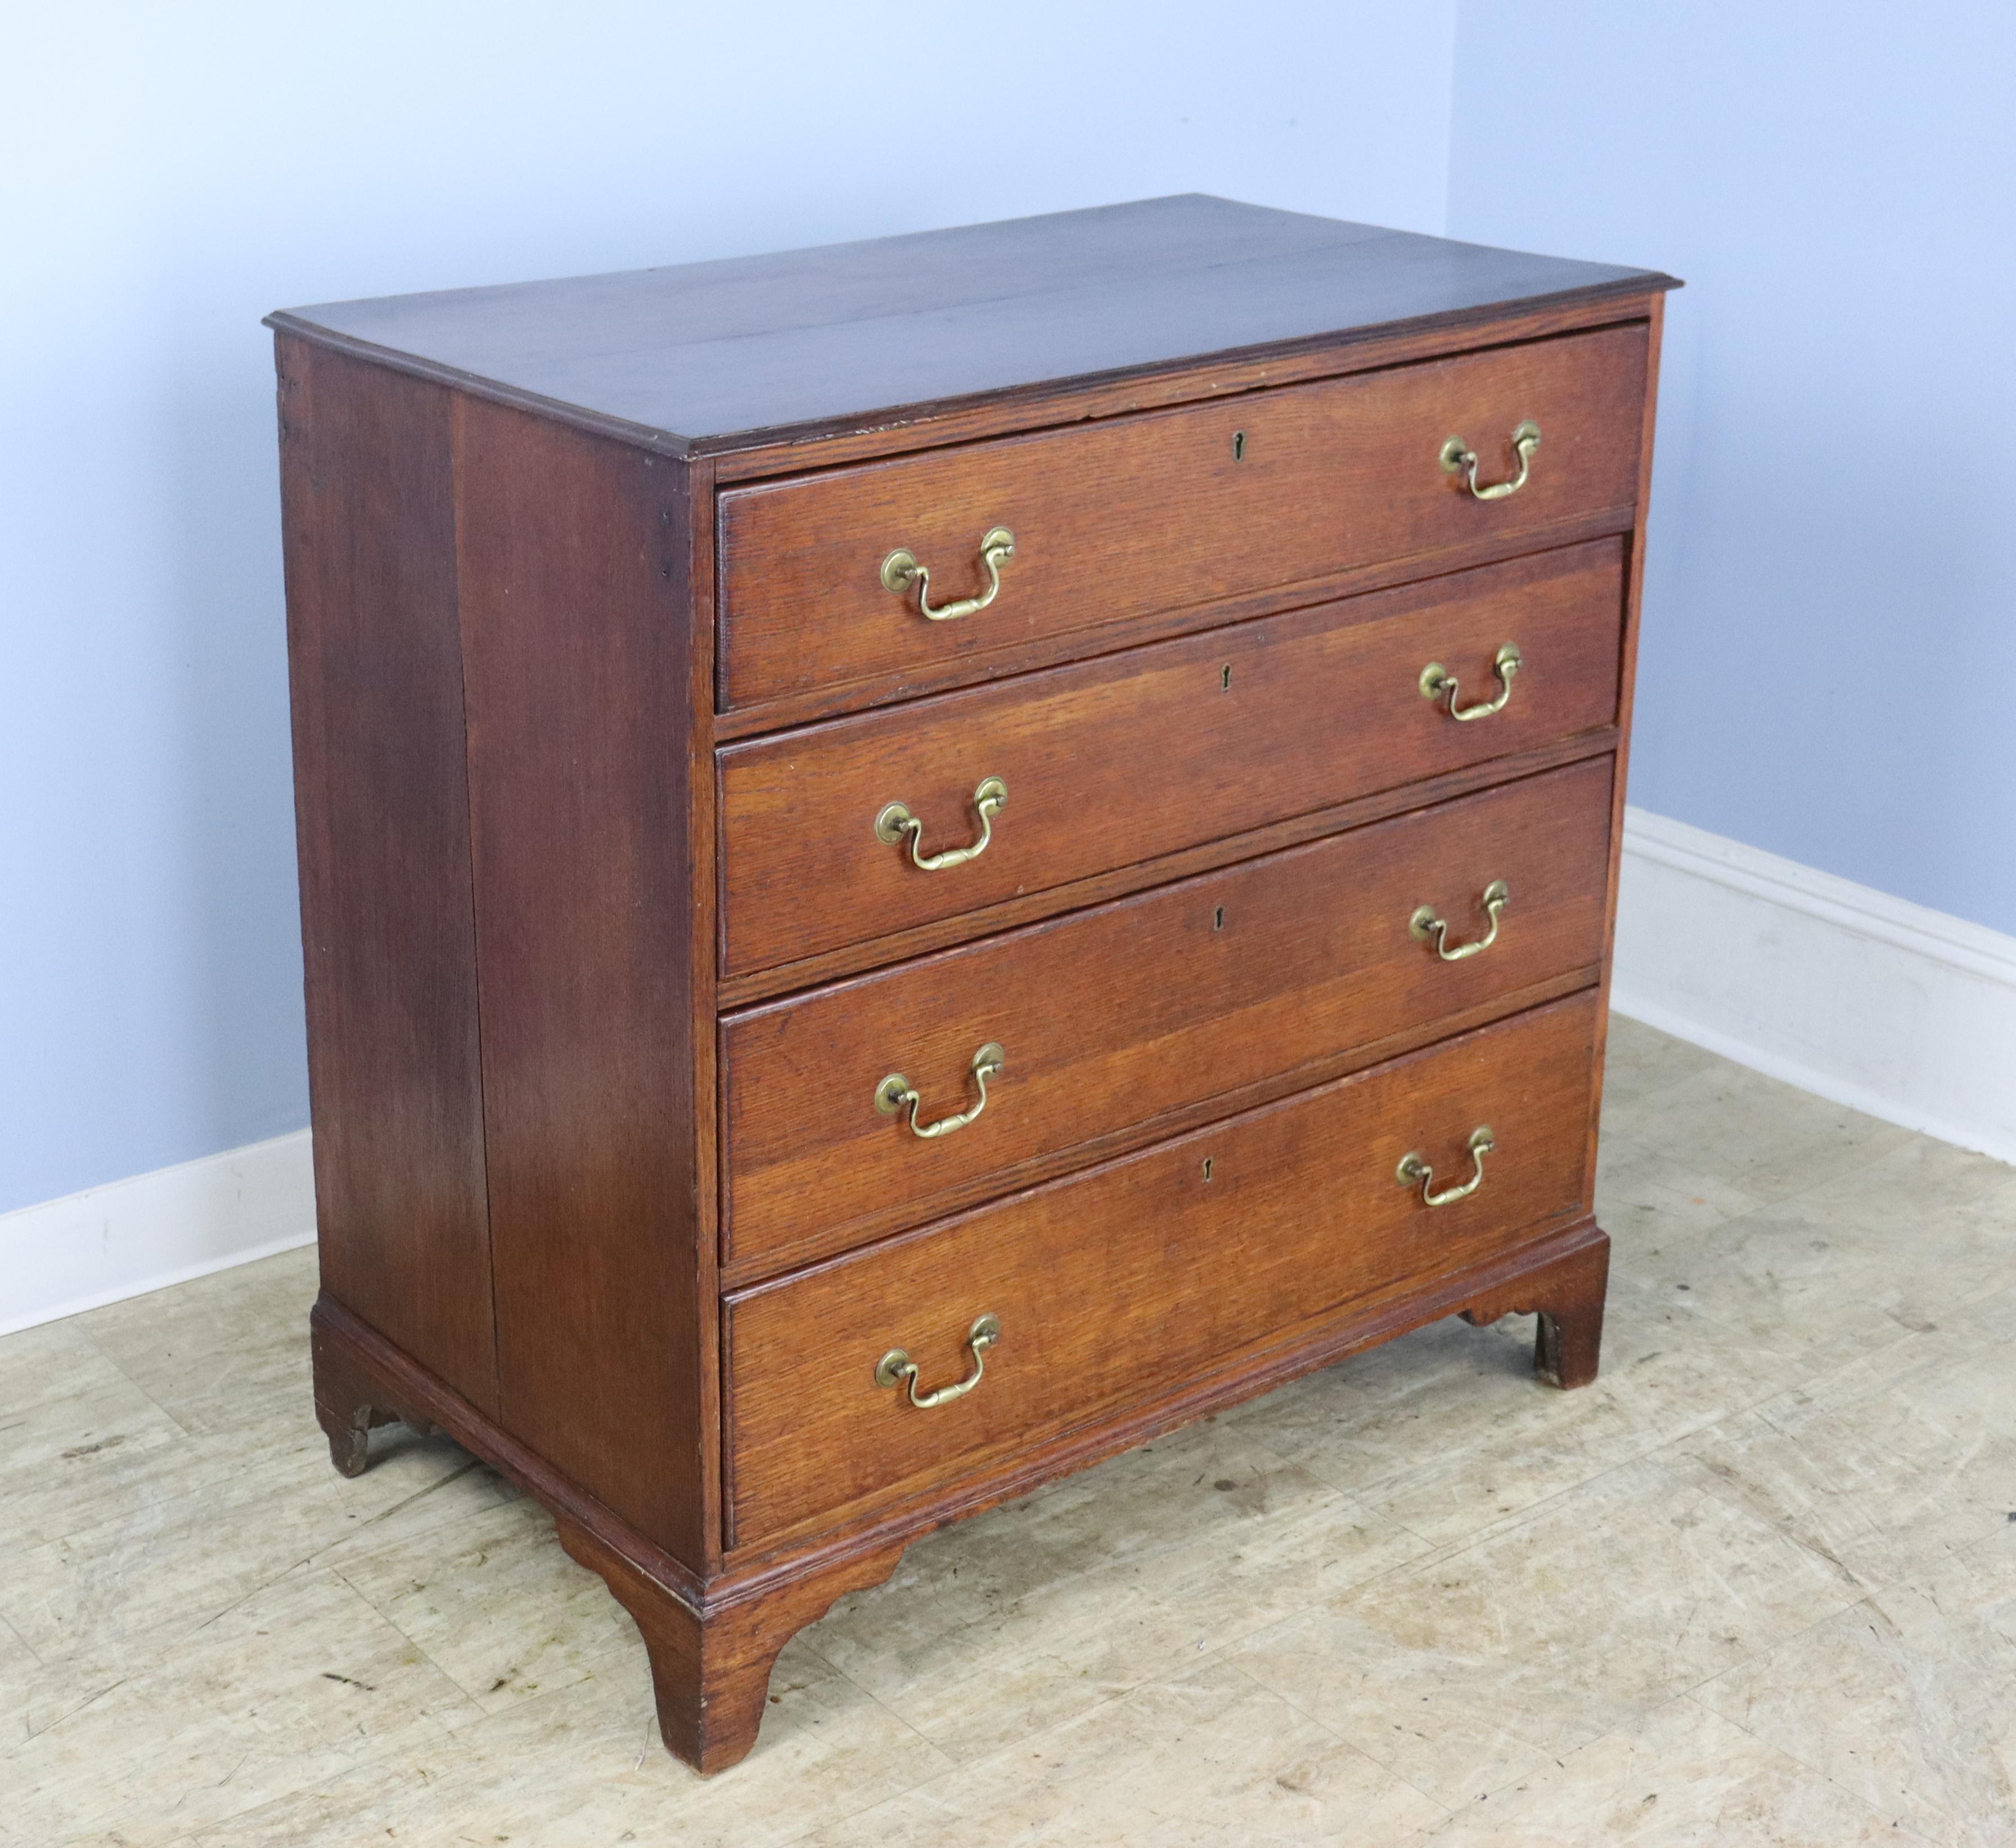 Beautiful original handles are a highlight of this terrific early oak dresser. Note the articulated ogee feet and charming keyholes. The smooth patinated top and the gentle moulded edge enhance the overall look. The bureau's warm color and lovely